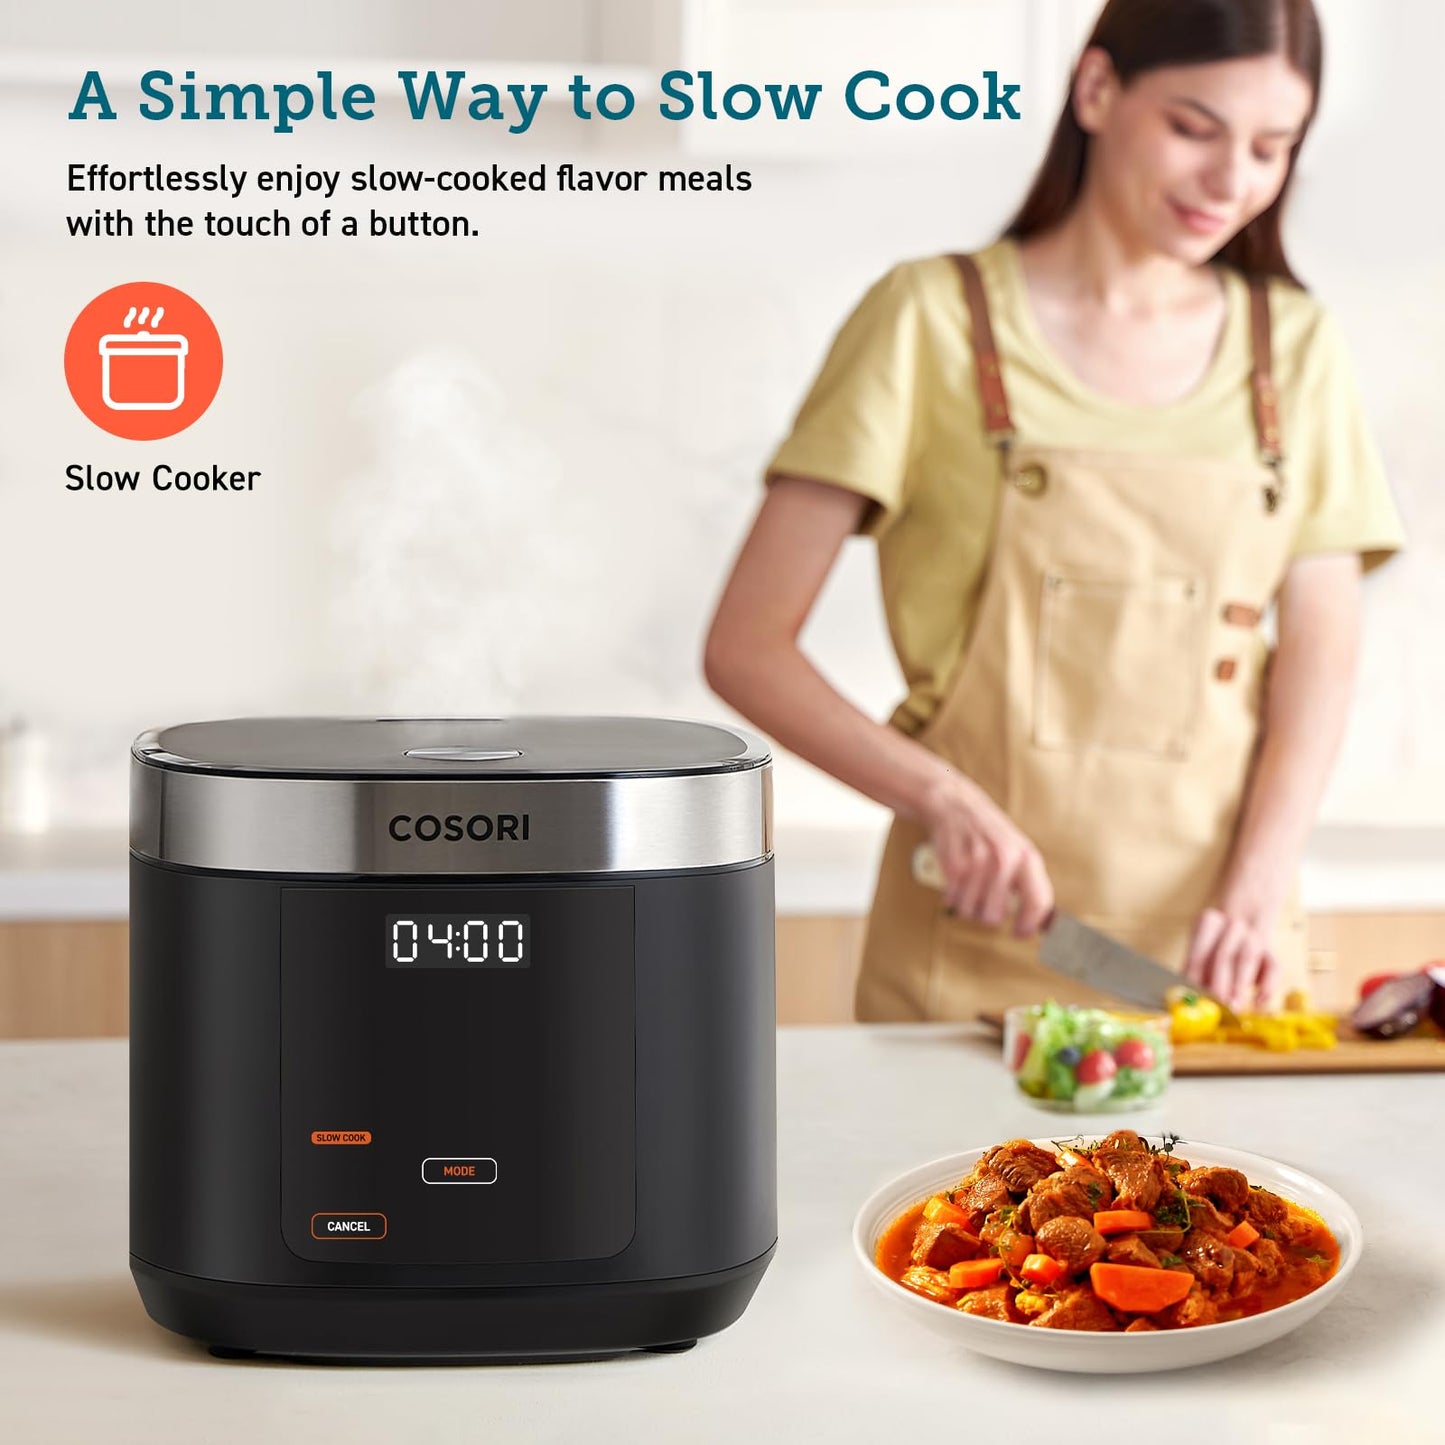 COSORI 18 Functions Rice Cooker, 24h Keep Warm & Timer, 10 cup Uncooked Rice Maker with Stainless Steel Steamer, Sauté, Slow Cooker, Fuzzy Logic Technology, Black